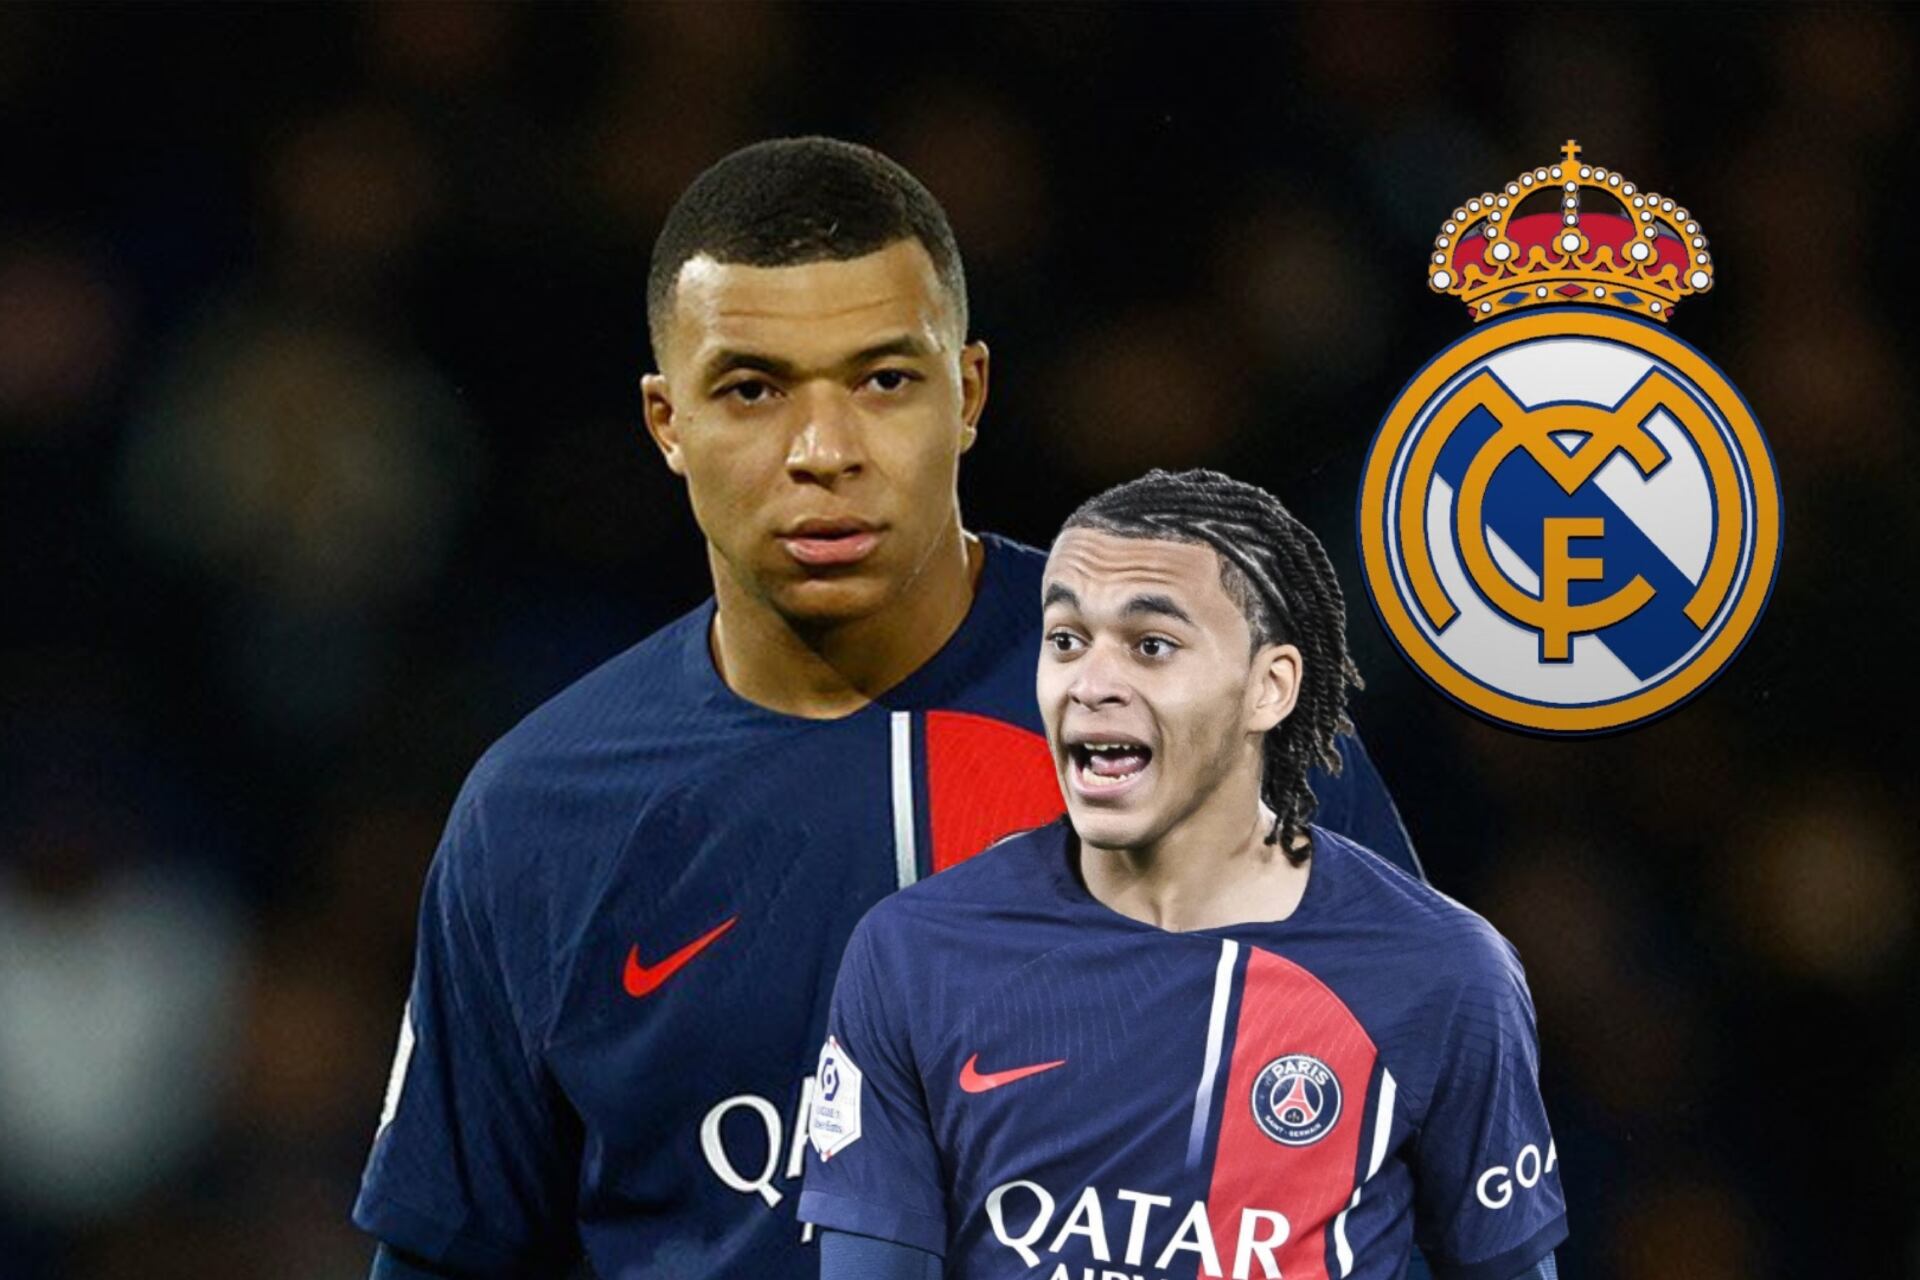 The new confirmation of Kylian Mbappé to Real Madrid, what his brother said that excites the fans